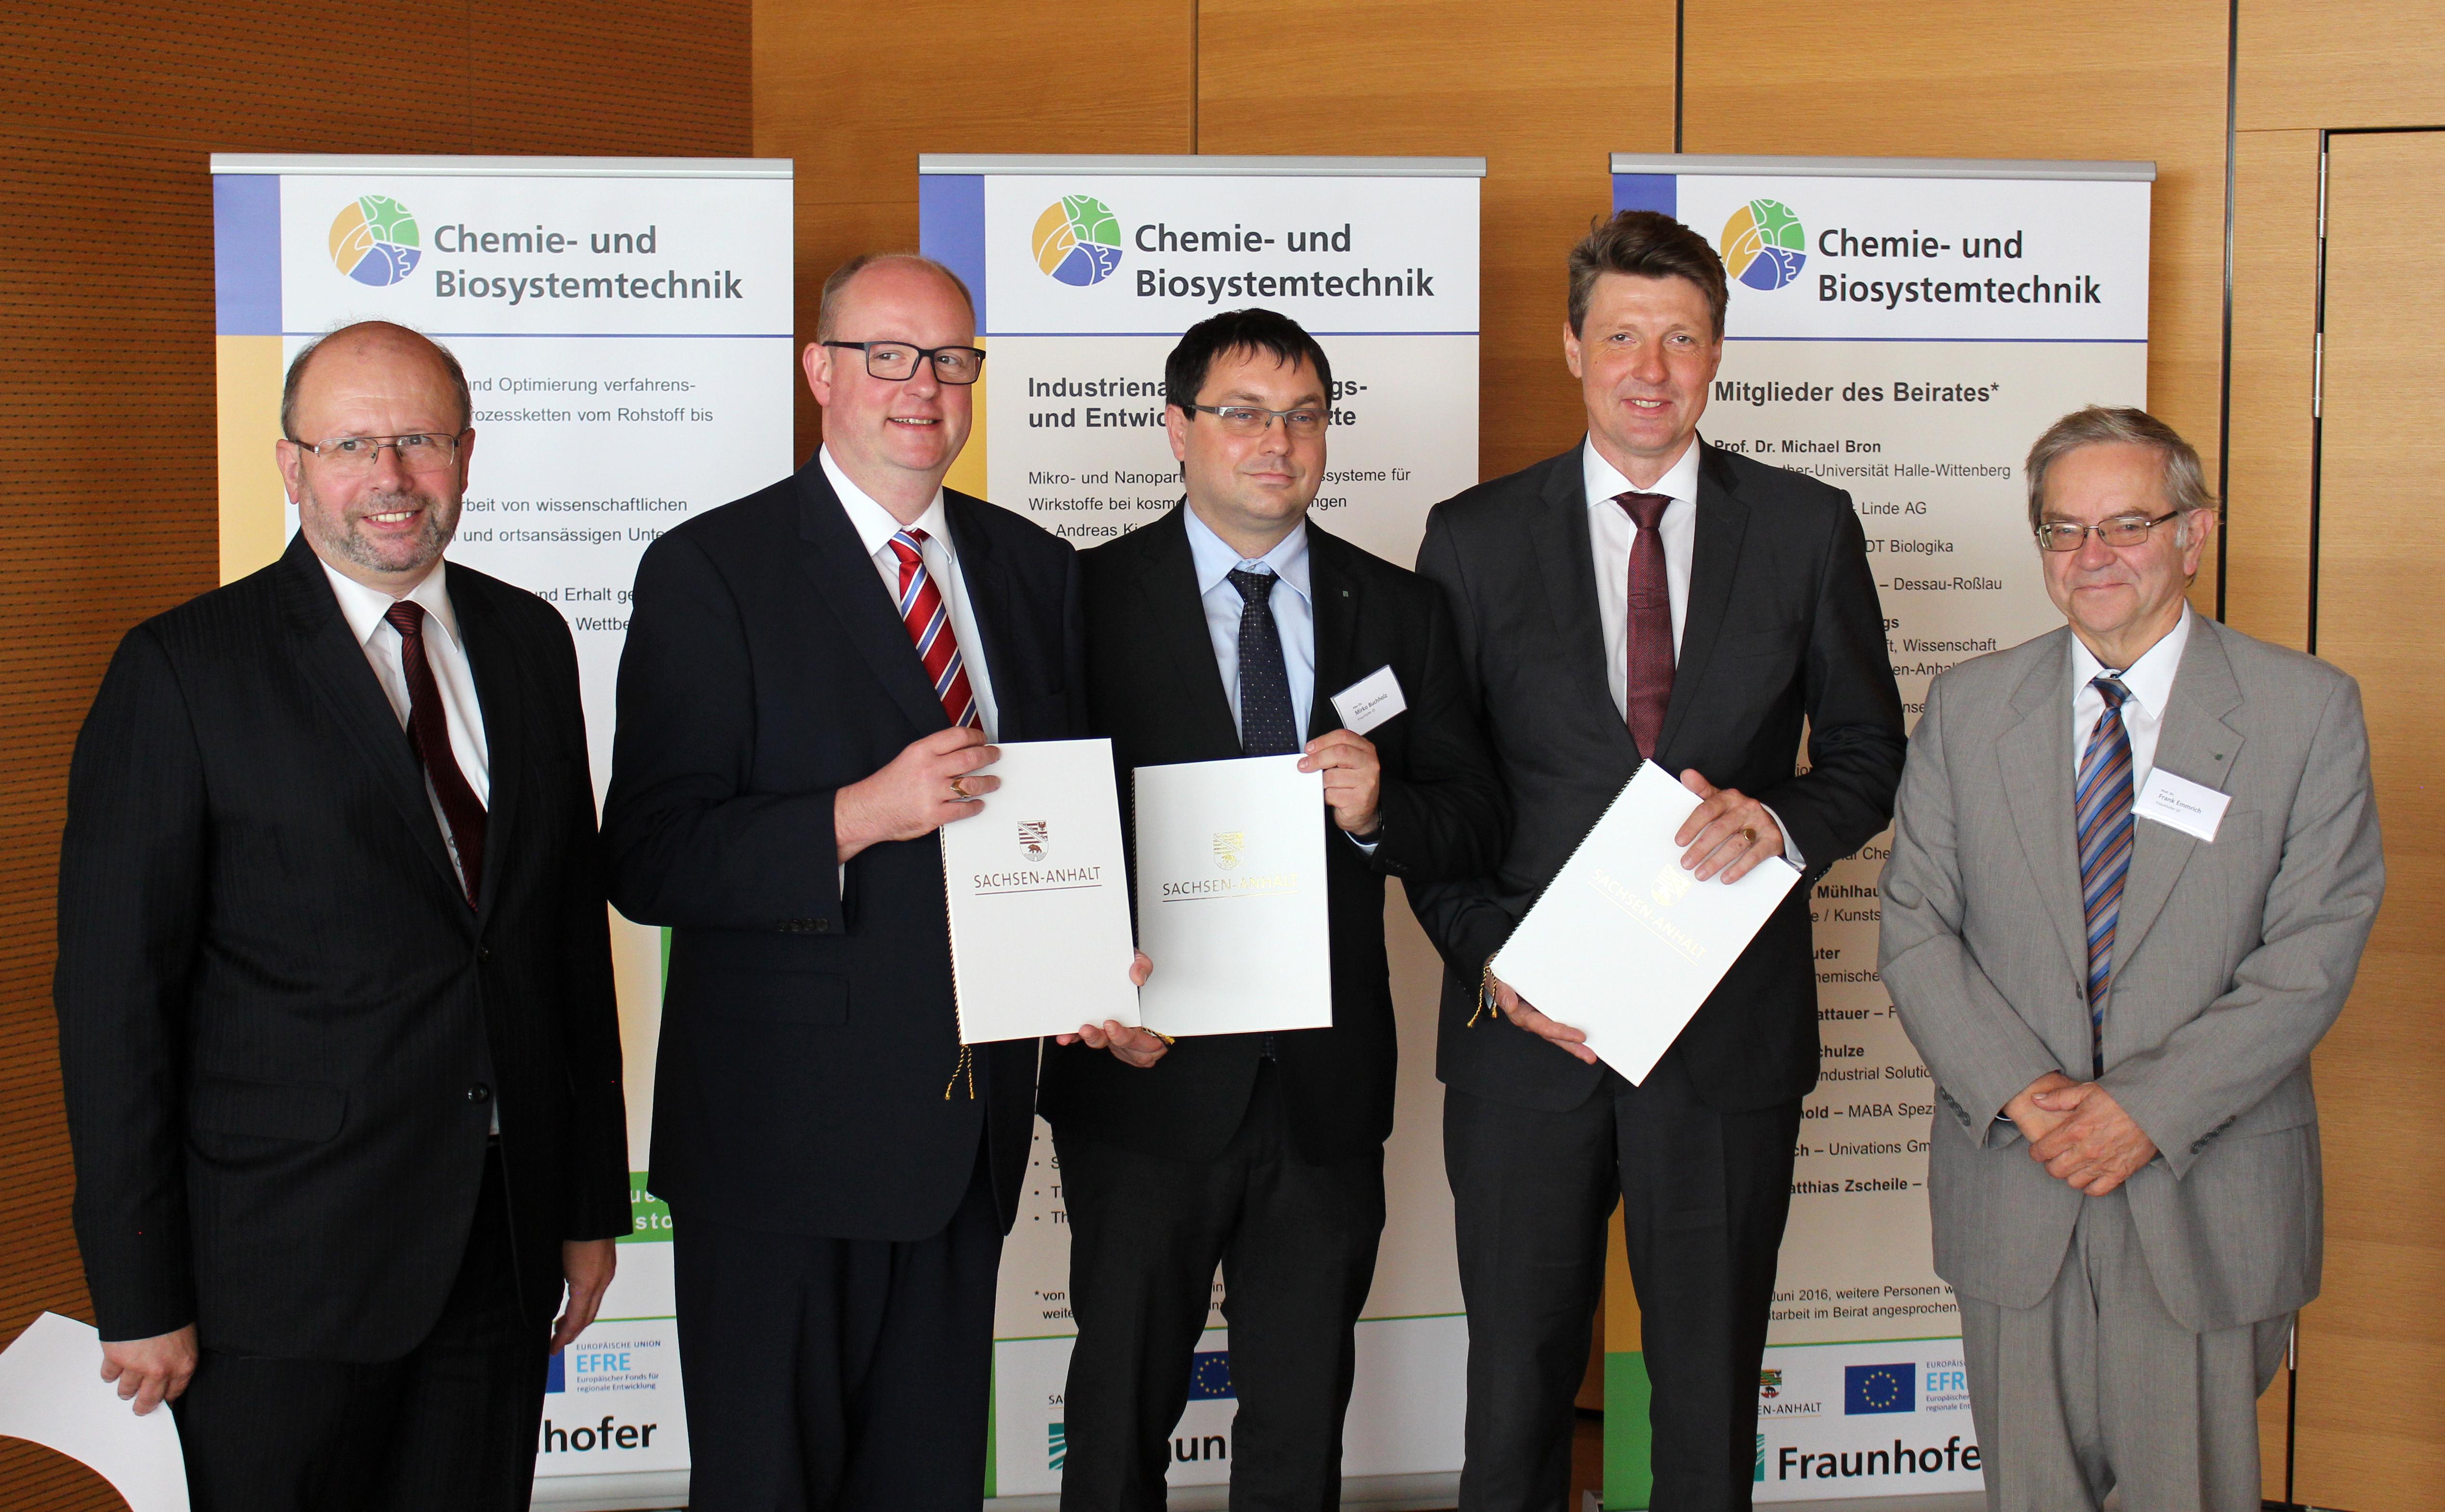 F.l.t.r.: Prof. Dr. Andreas Heilmann, Fraunhofer IMWS, CBS spokesman in Halle (Saale); Jörg Felgner, Minister for Economic Affairs, Science and Digitalization in the State of Saxony-Anhalt; Dr. Mirko Buchholz, Head of the Drug Design and Analytical Chemistry Unit – Department of Drug Design and Target Validation at the Fraunhofer IZI in Halle (Saale); Prof. Dr. Ralf Wehrspohn, Director of the Fraunhofer IMWS; Prof. Dr. Frank Emmrich, Director of the Fraunhofer IZI